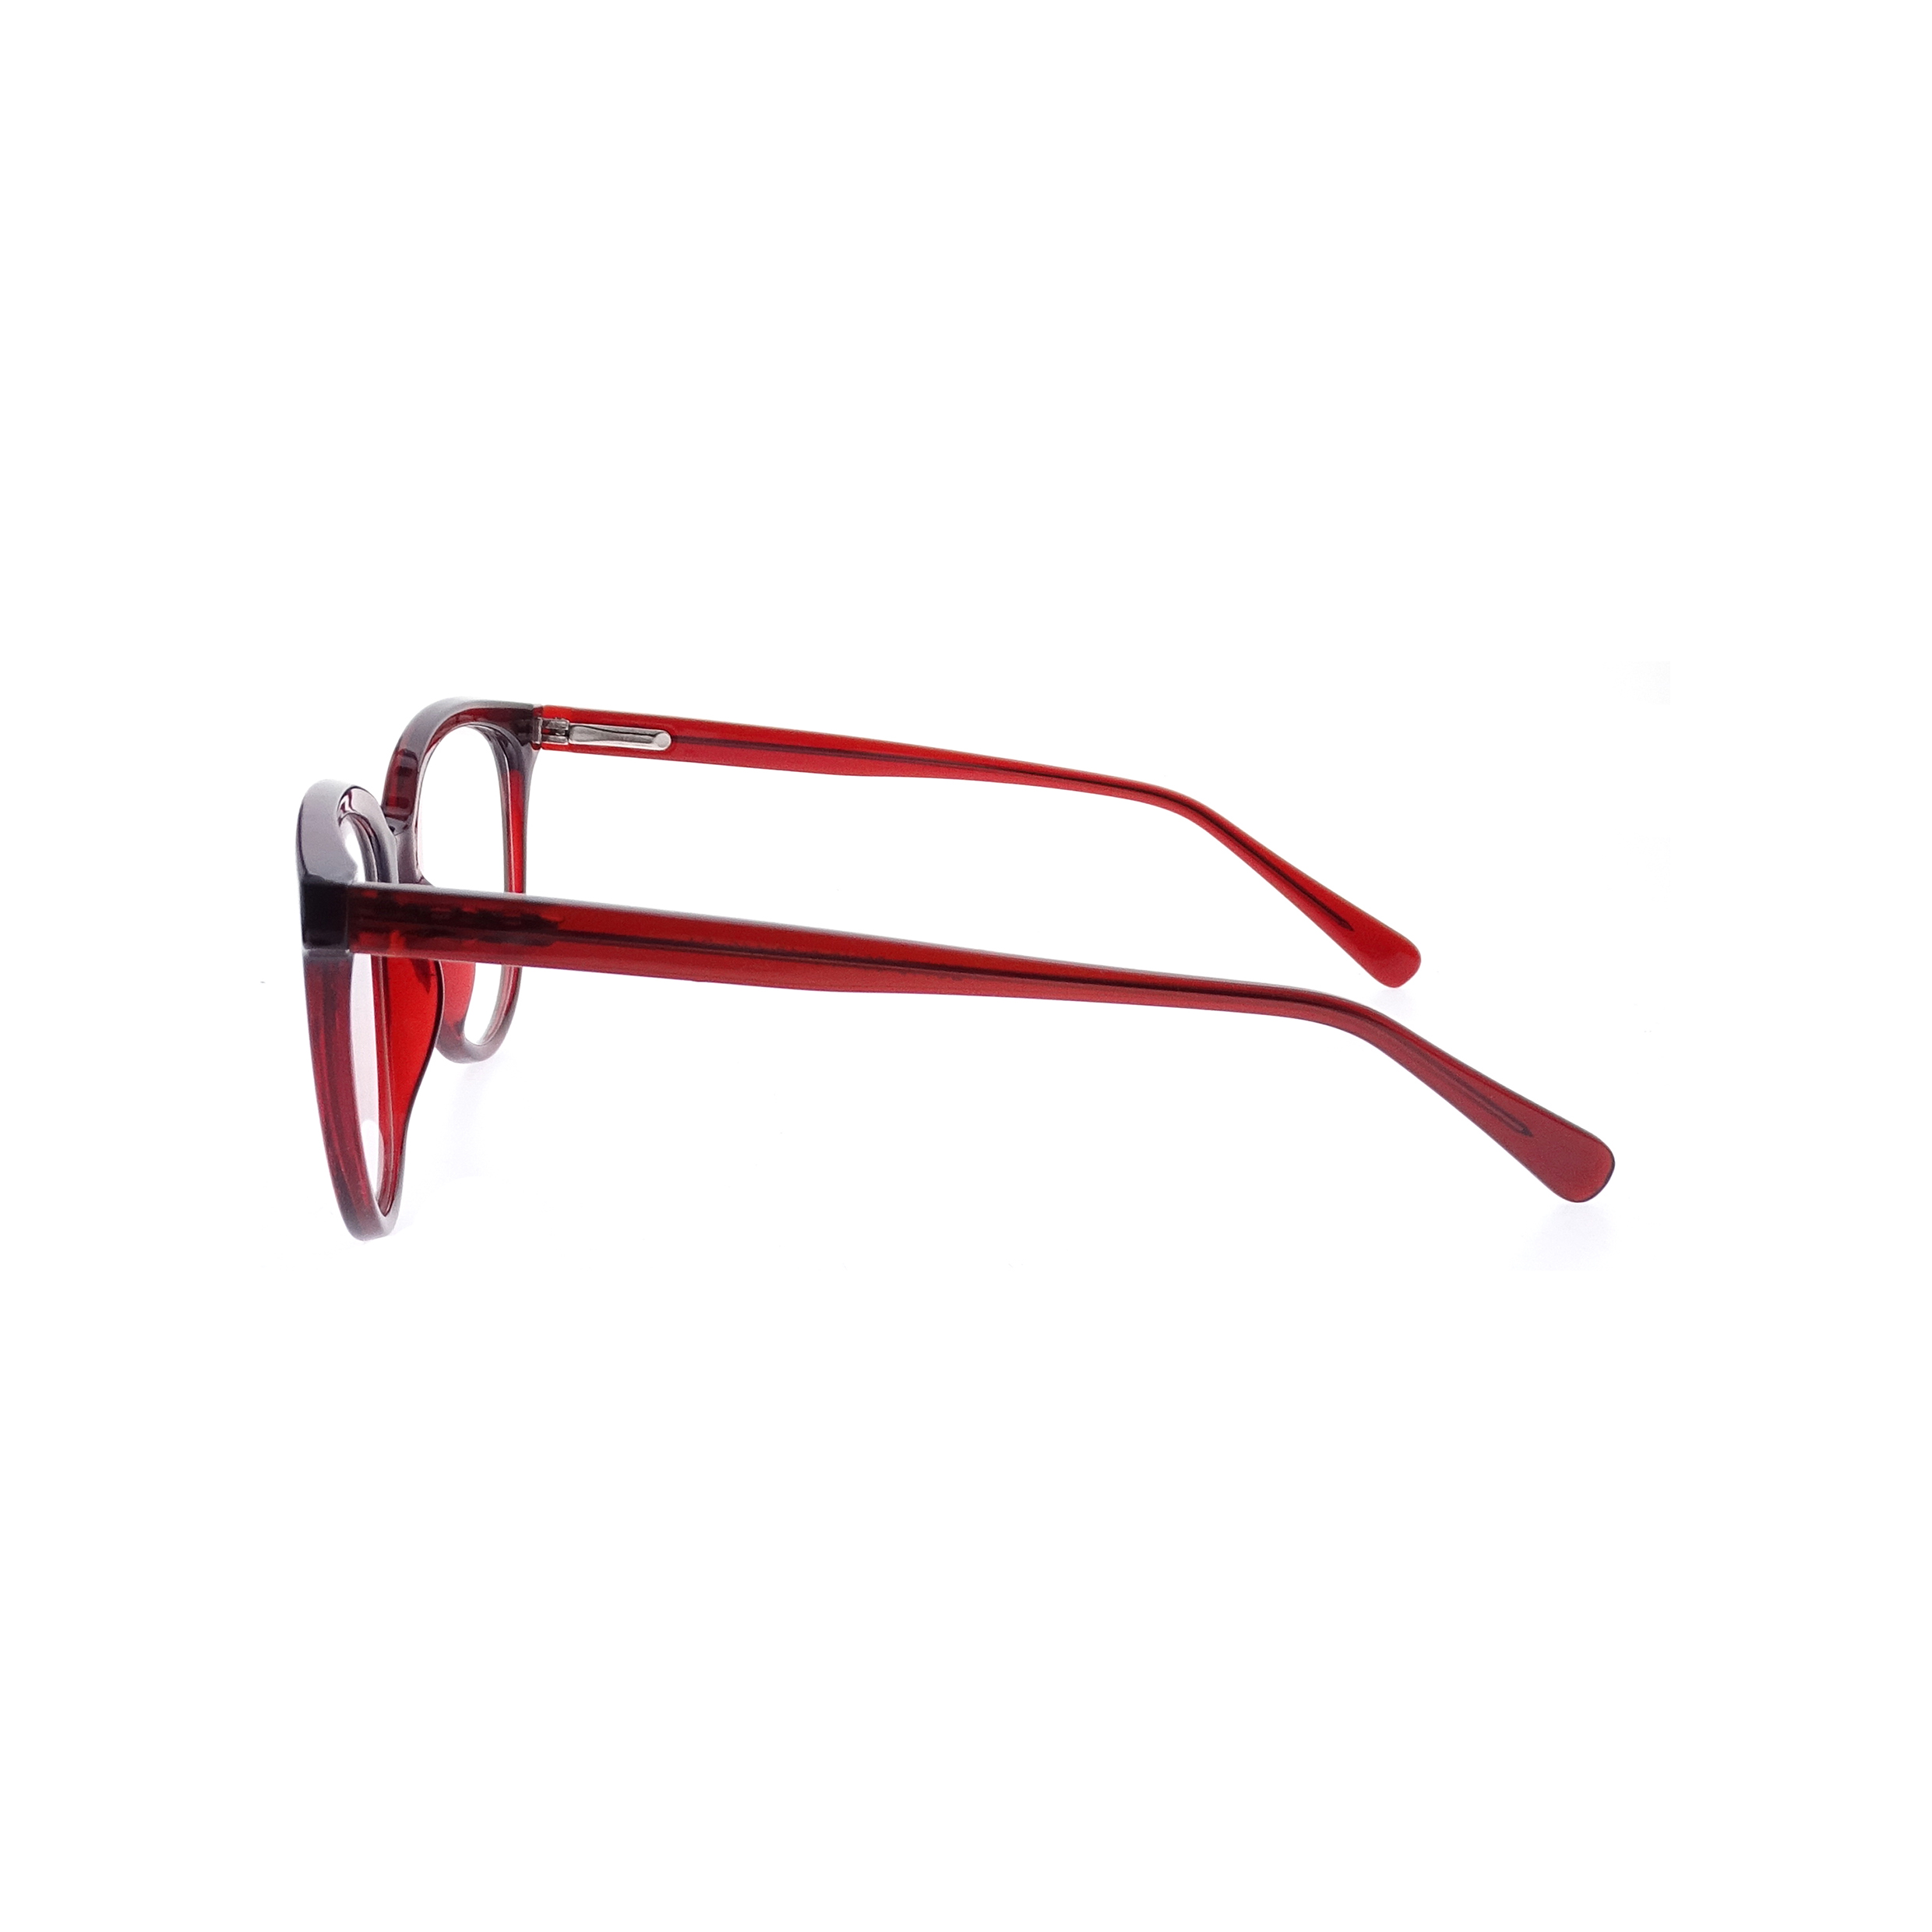 Colorful Design Spectacle Glass New Model Women CP Designer Optical Eyeglass Frames LO-OI235